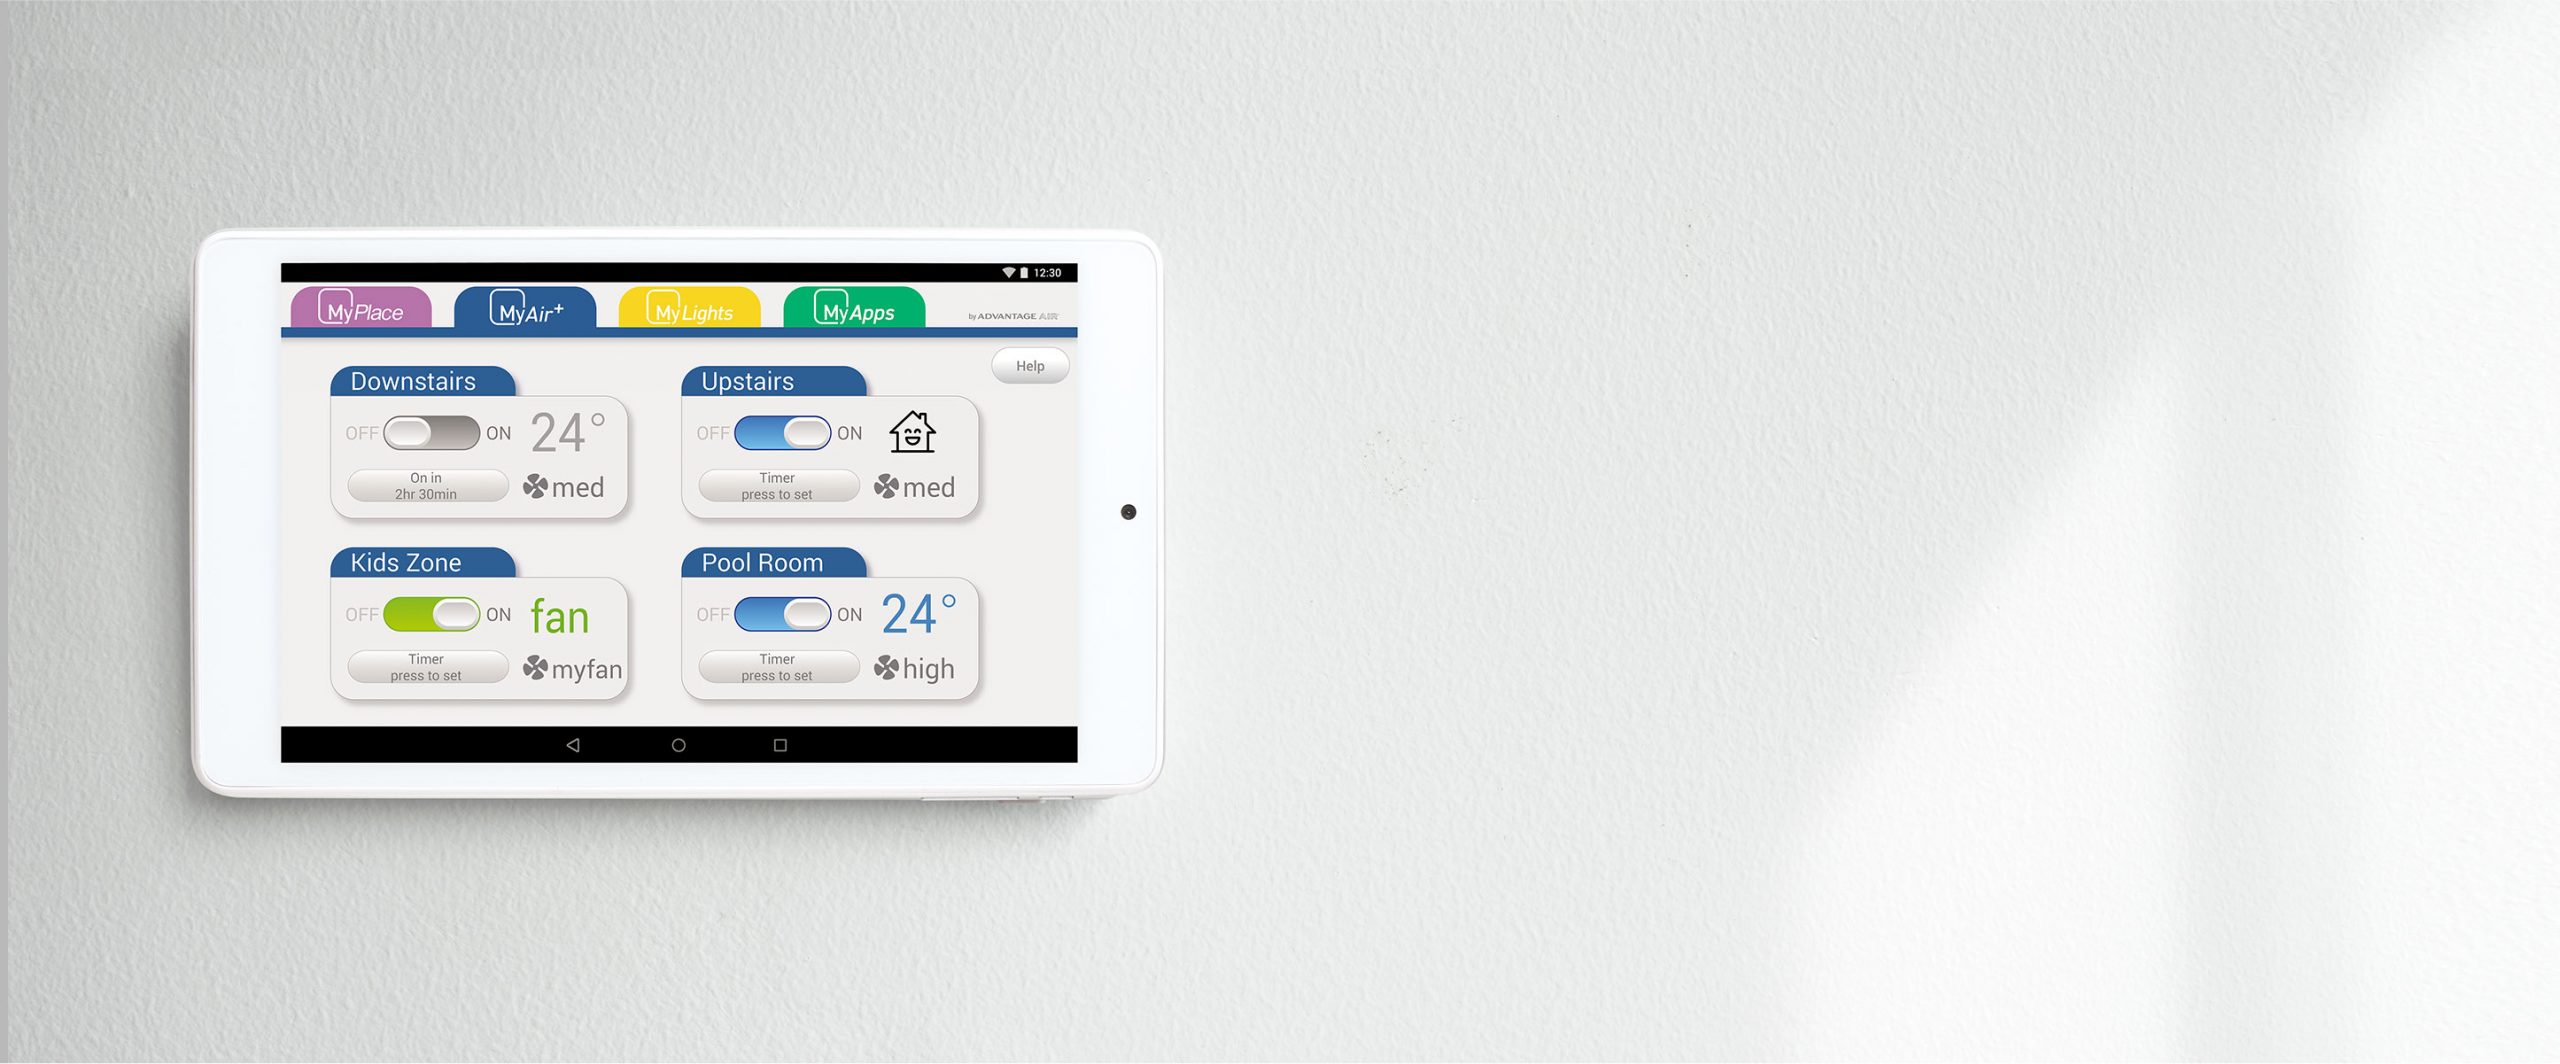 Control your air conditioning with the MyAir app via the touchscreen tablet